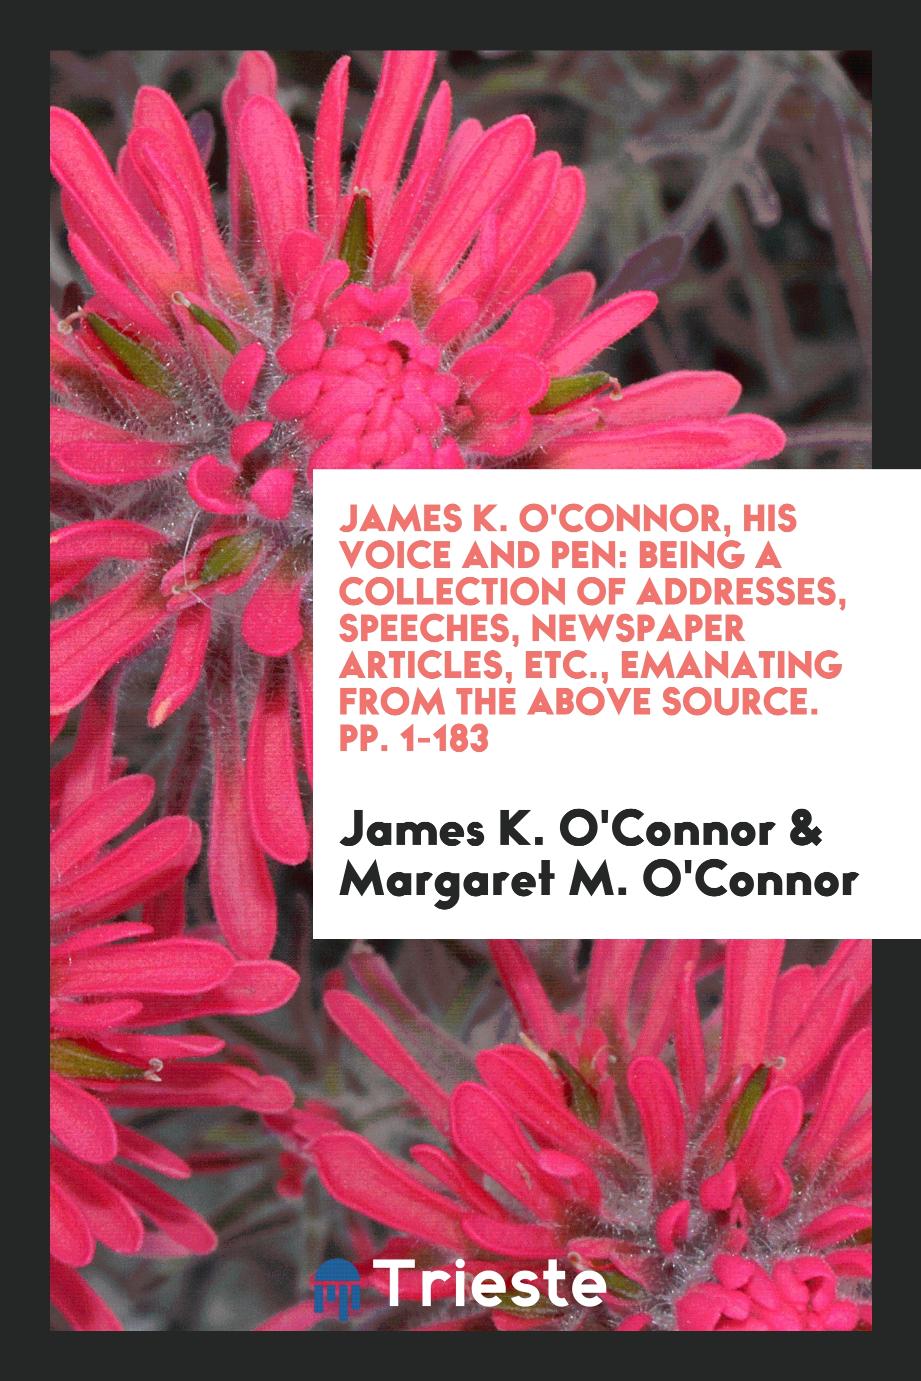 James K. O'Connor, His Voice and Pen: Being a Collection of Addresses, Speeches, Newspaper Articles, Etc., Emanating from the Above Source. pp. 1-183